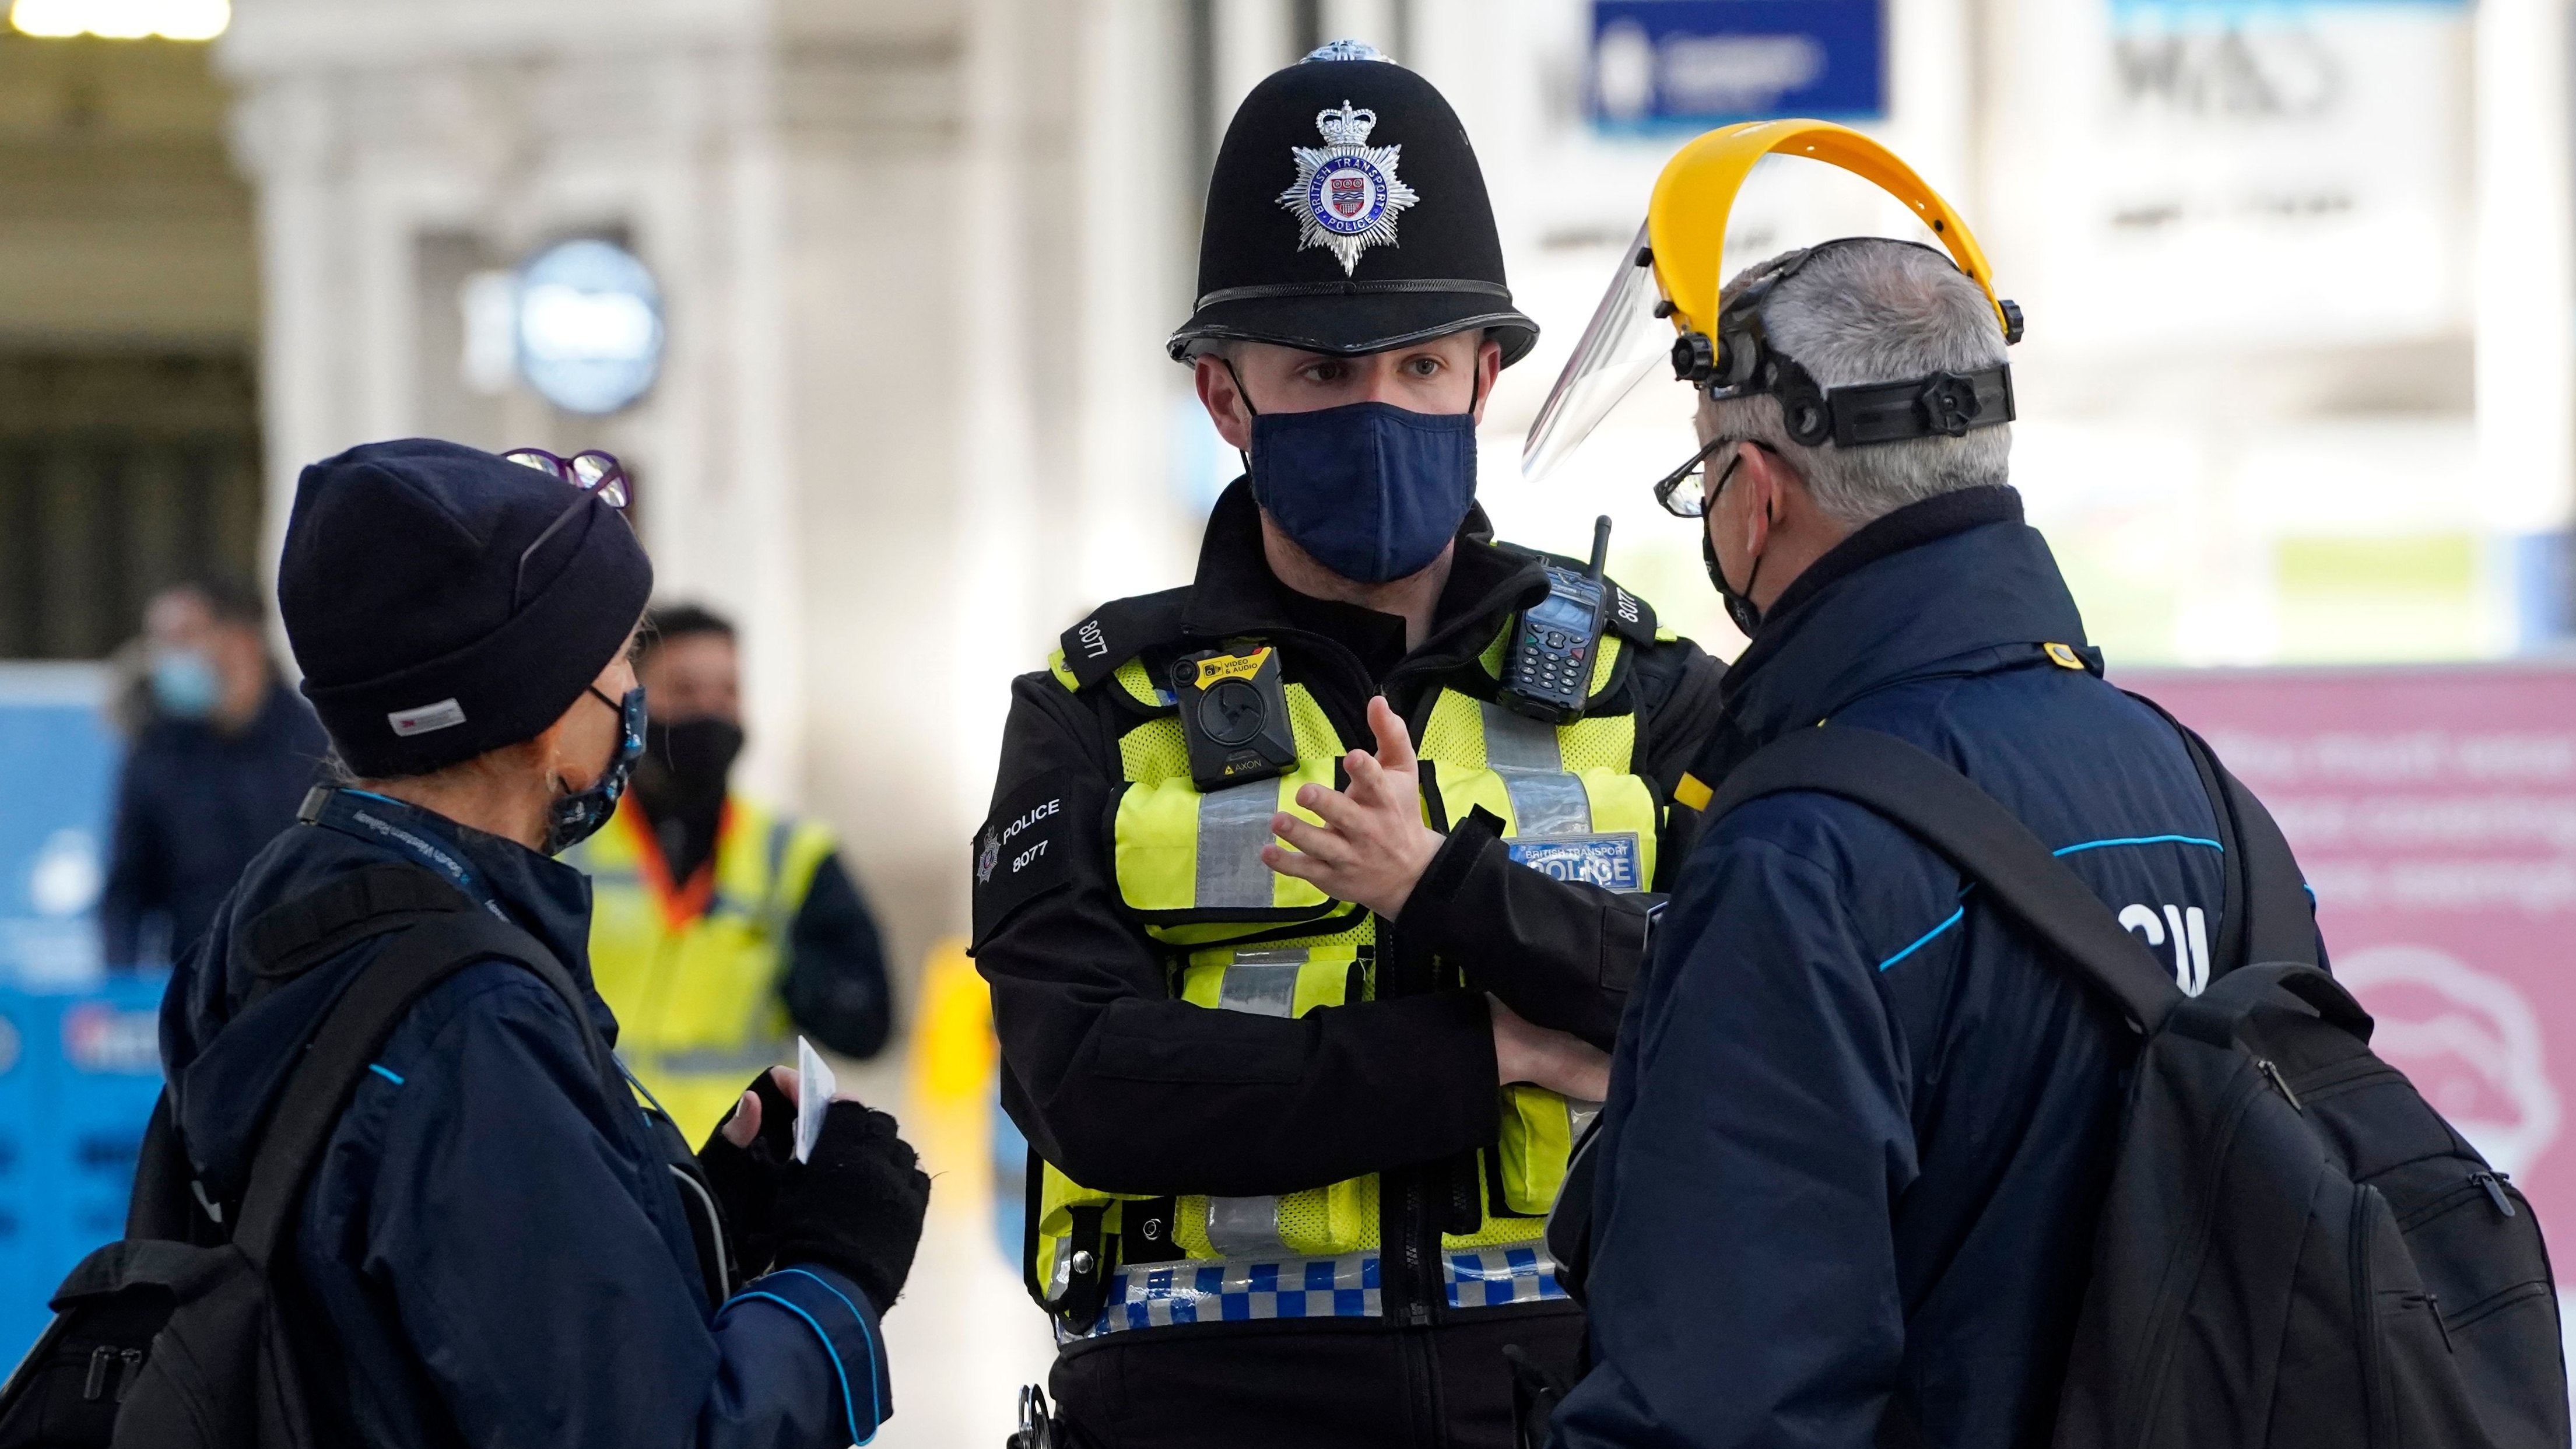 A member of the British Transport Police speaks with travellers at Waterloo Station